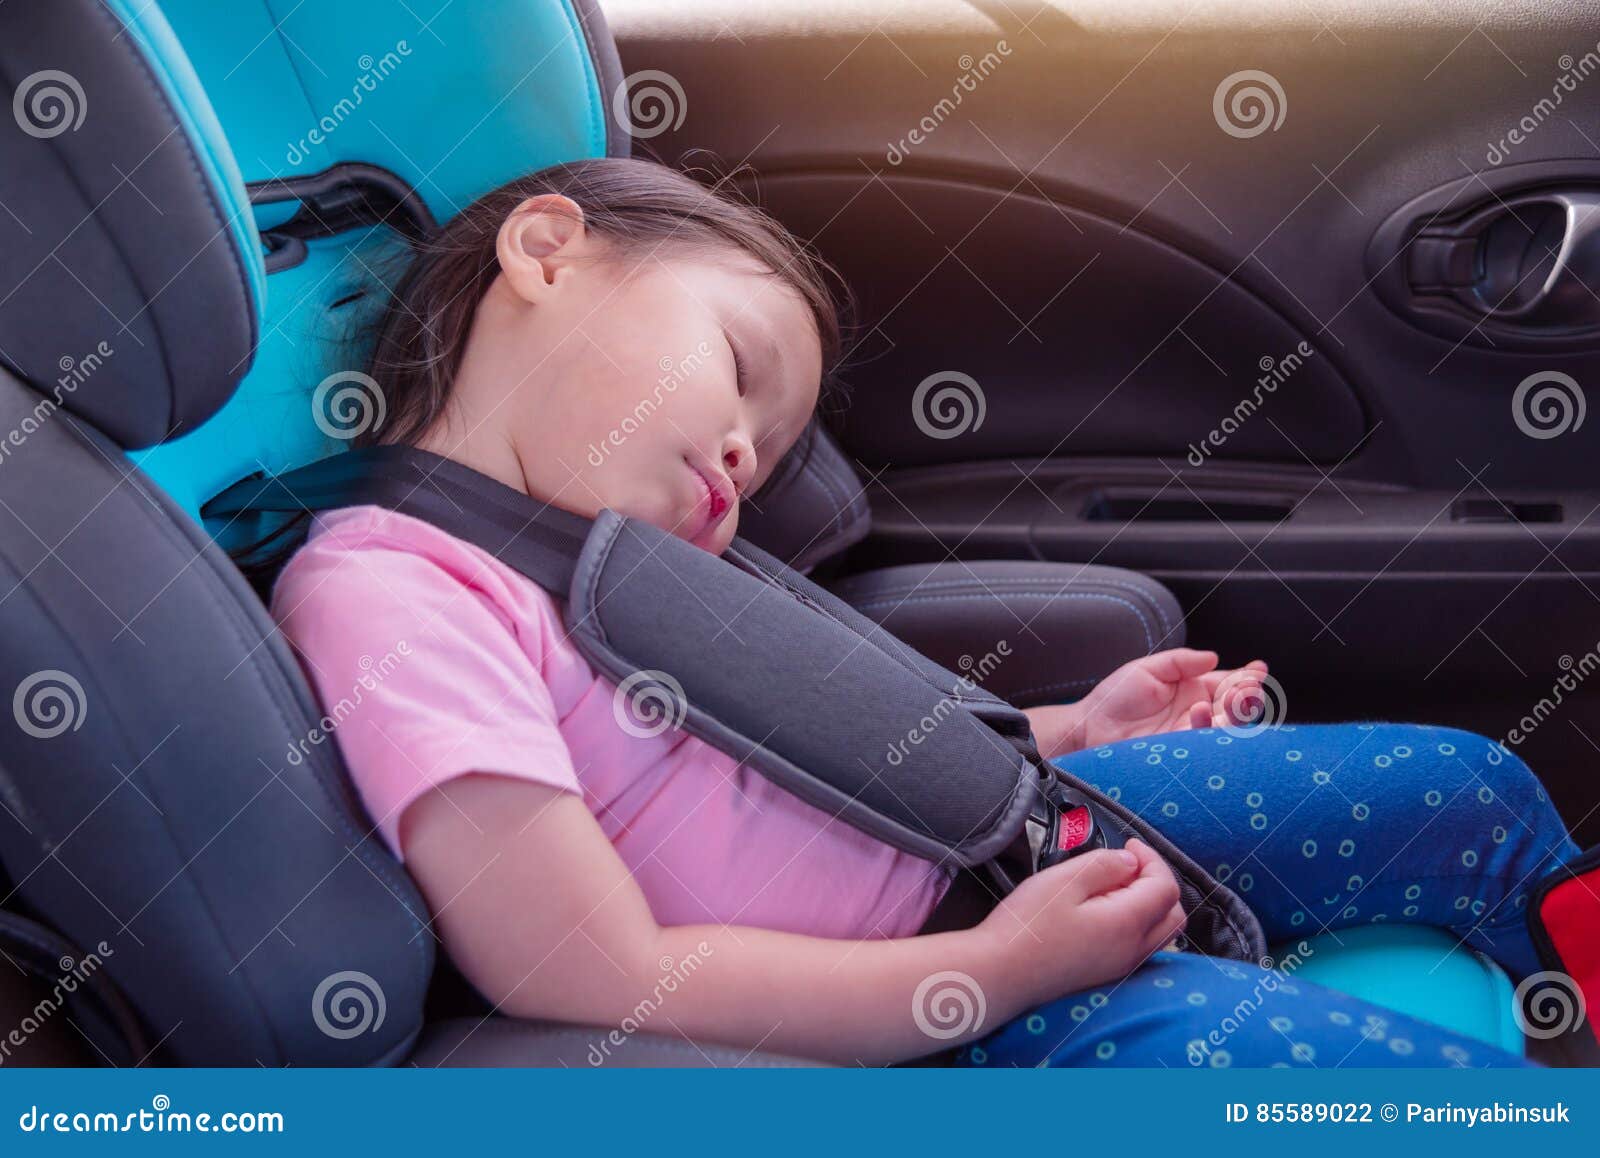 732 Woman Sleeping Car Stock Photos - Free & Royalty-Free Stock Photos from  Dreamstime